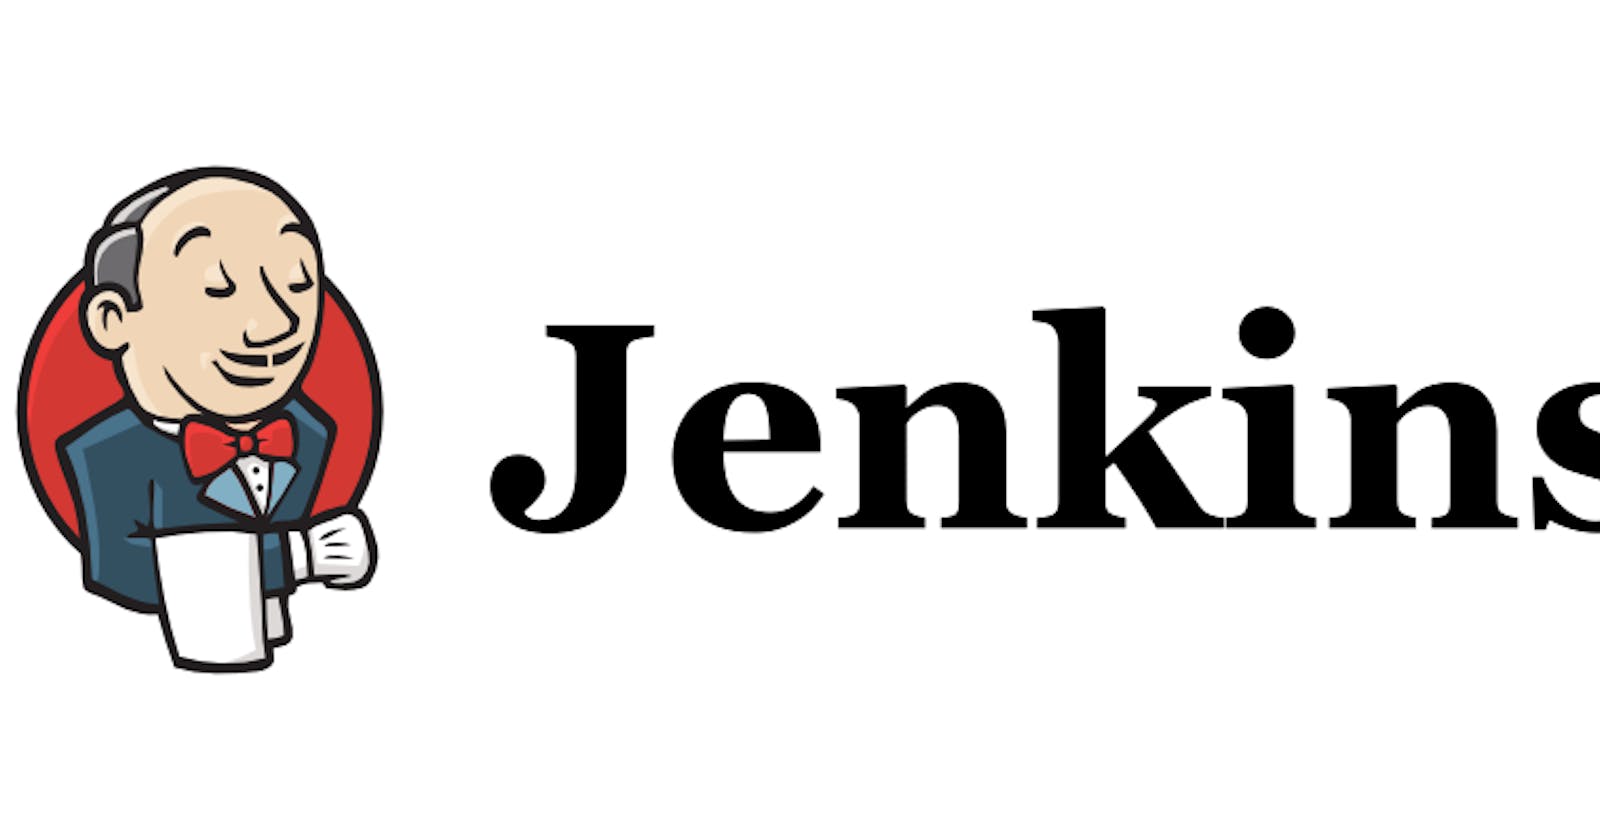 Getting Started With Jenkins